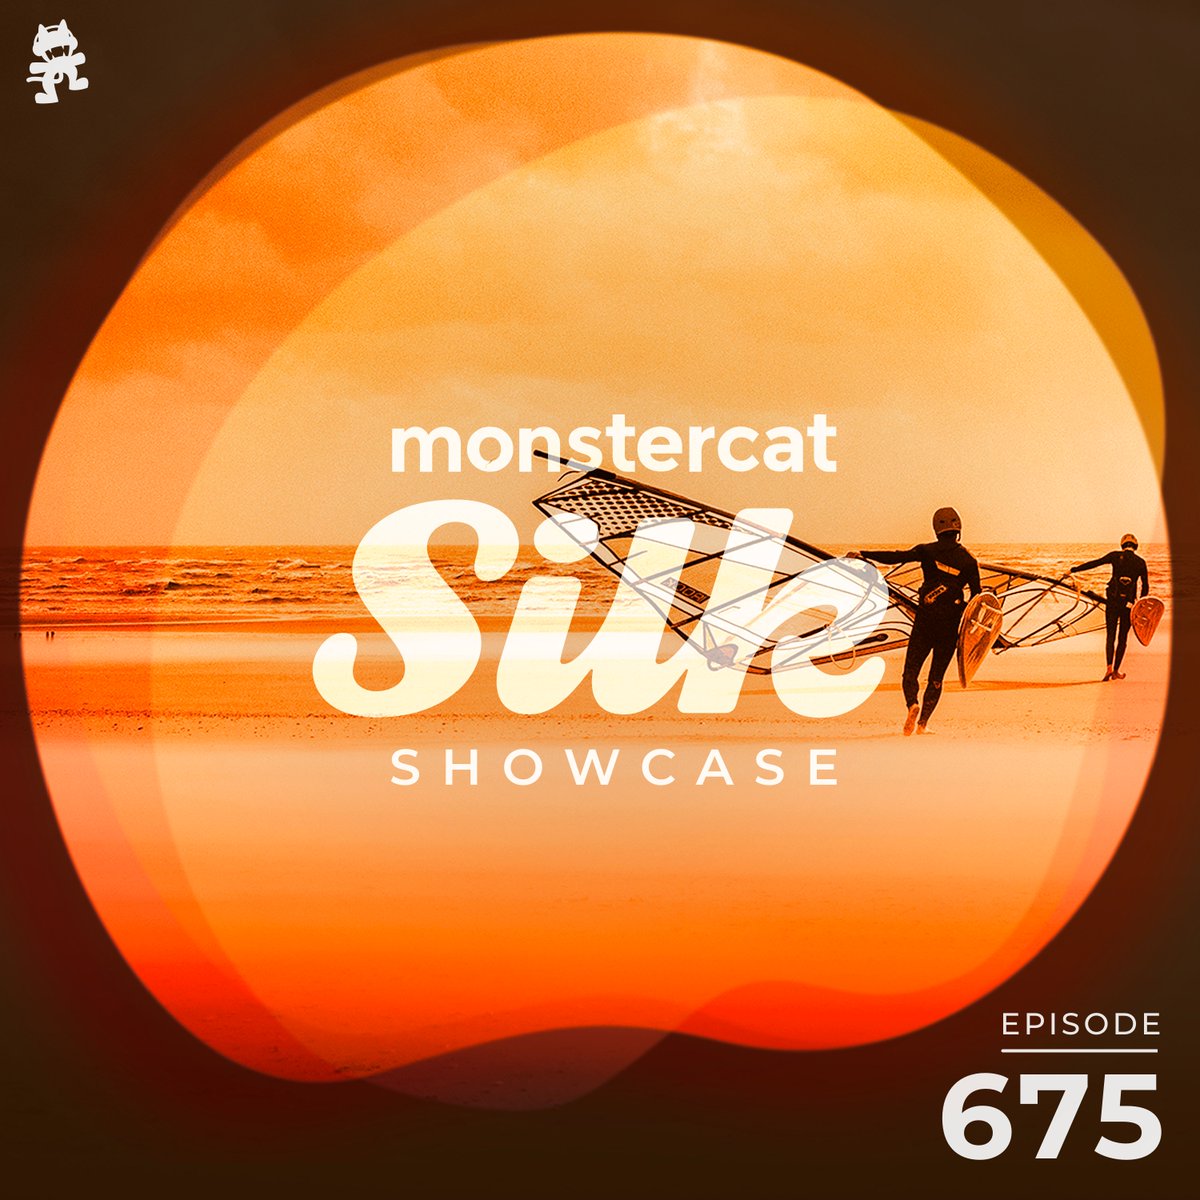 Happy Friday, friends. Really enjoyed putting together @MonstercatSilk Showcase #675. This week's show includes today's brand new release by @_shingonakamura, as well as a variety of other recent and forthcoming Silk releases. Hope you enjoy: monster.cat/mssradio 🧡